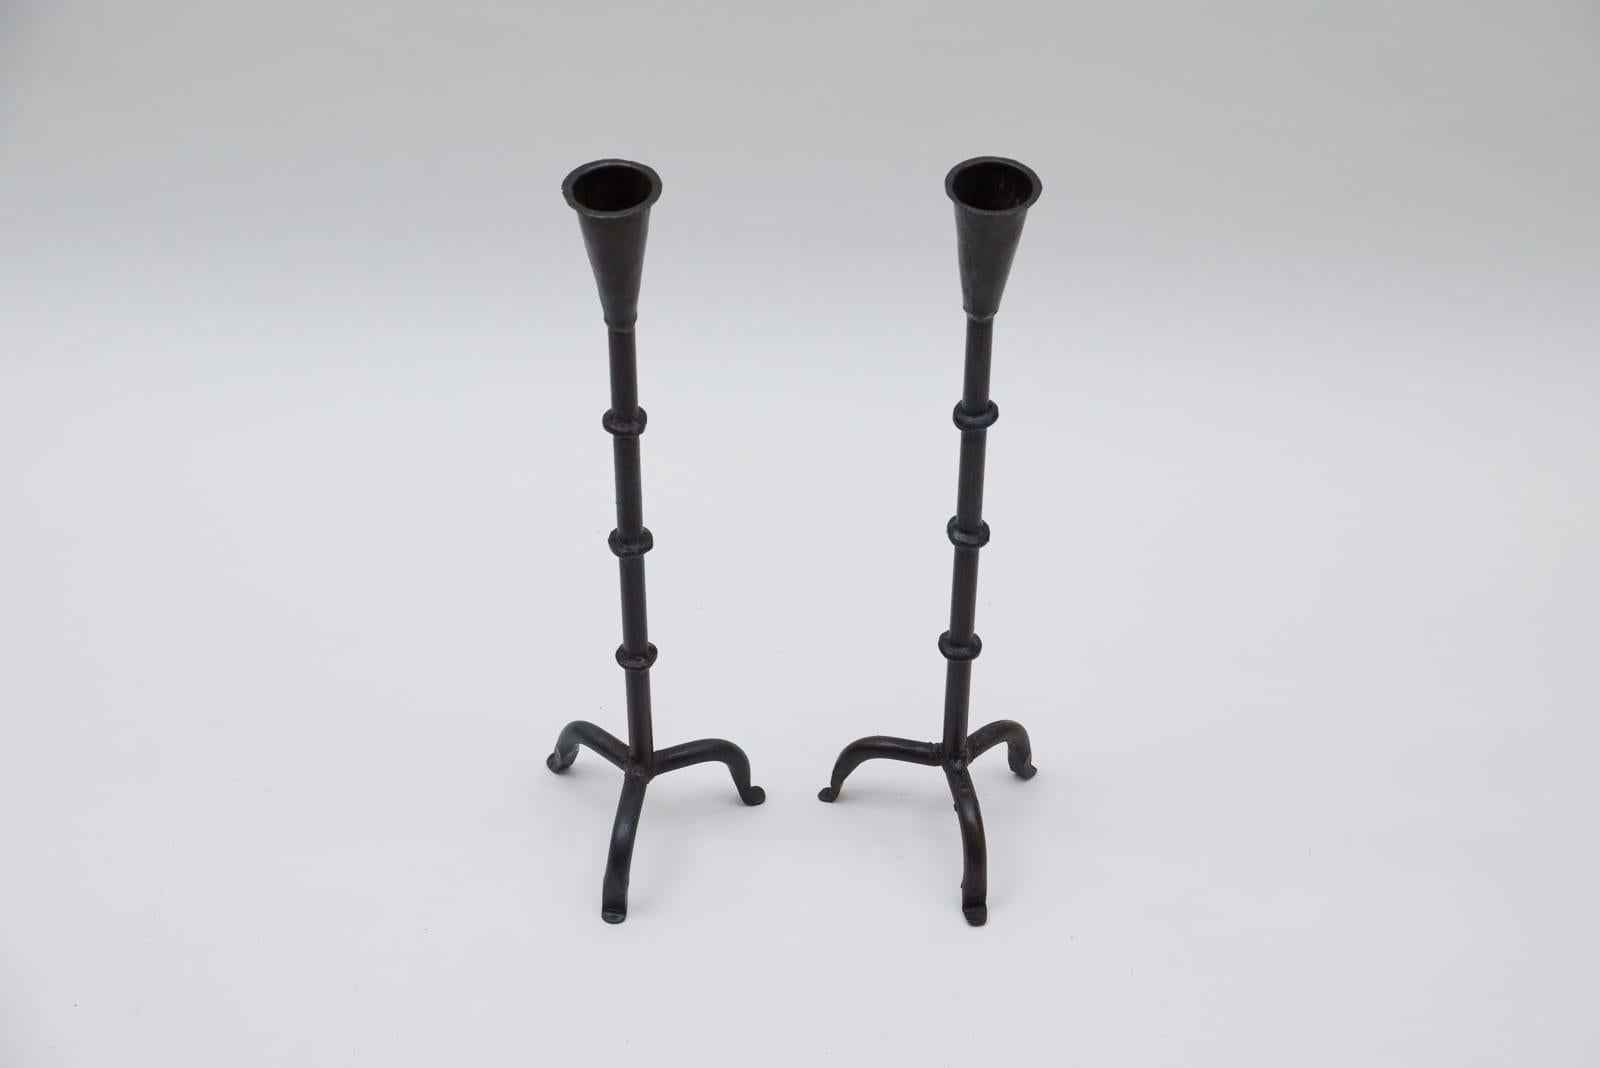 Super decorative.

These two candleholders measure 55cm in height and 15cm in width. 
The top diameter measures 4cm and tapers to 2.5cm at the bottom.